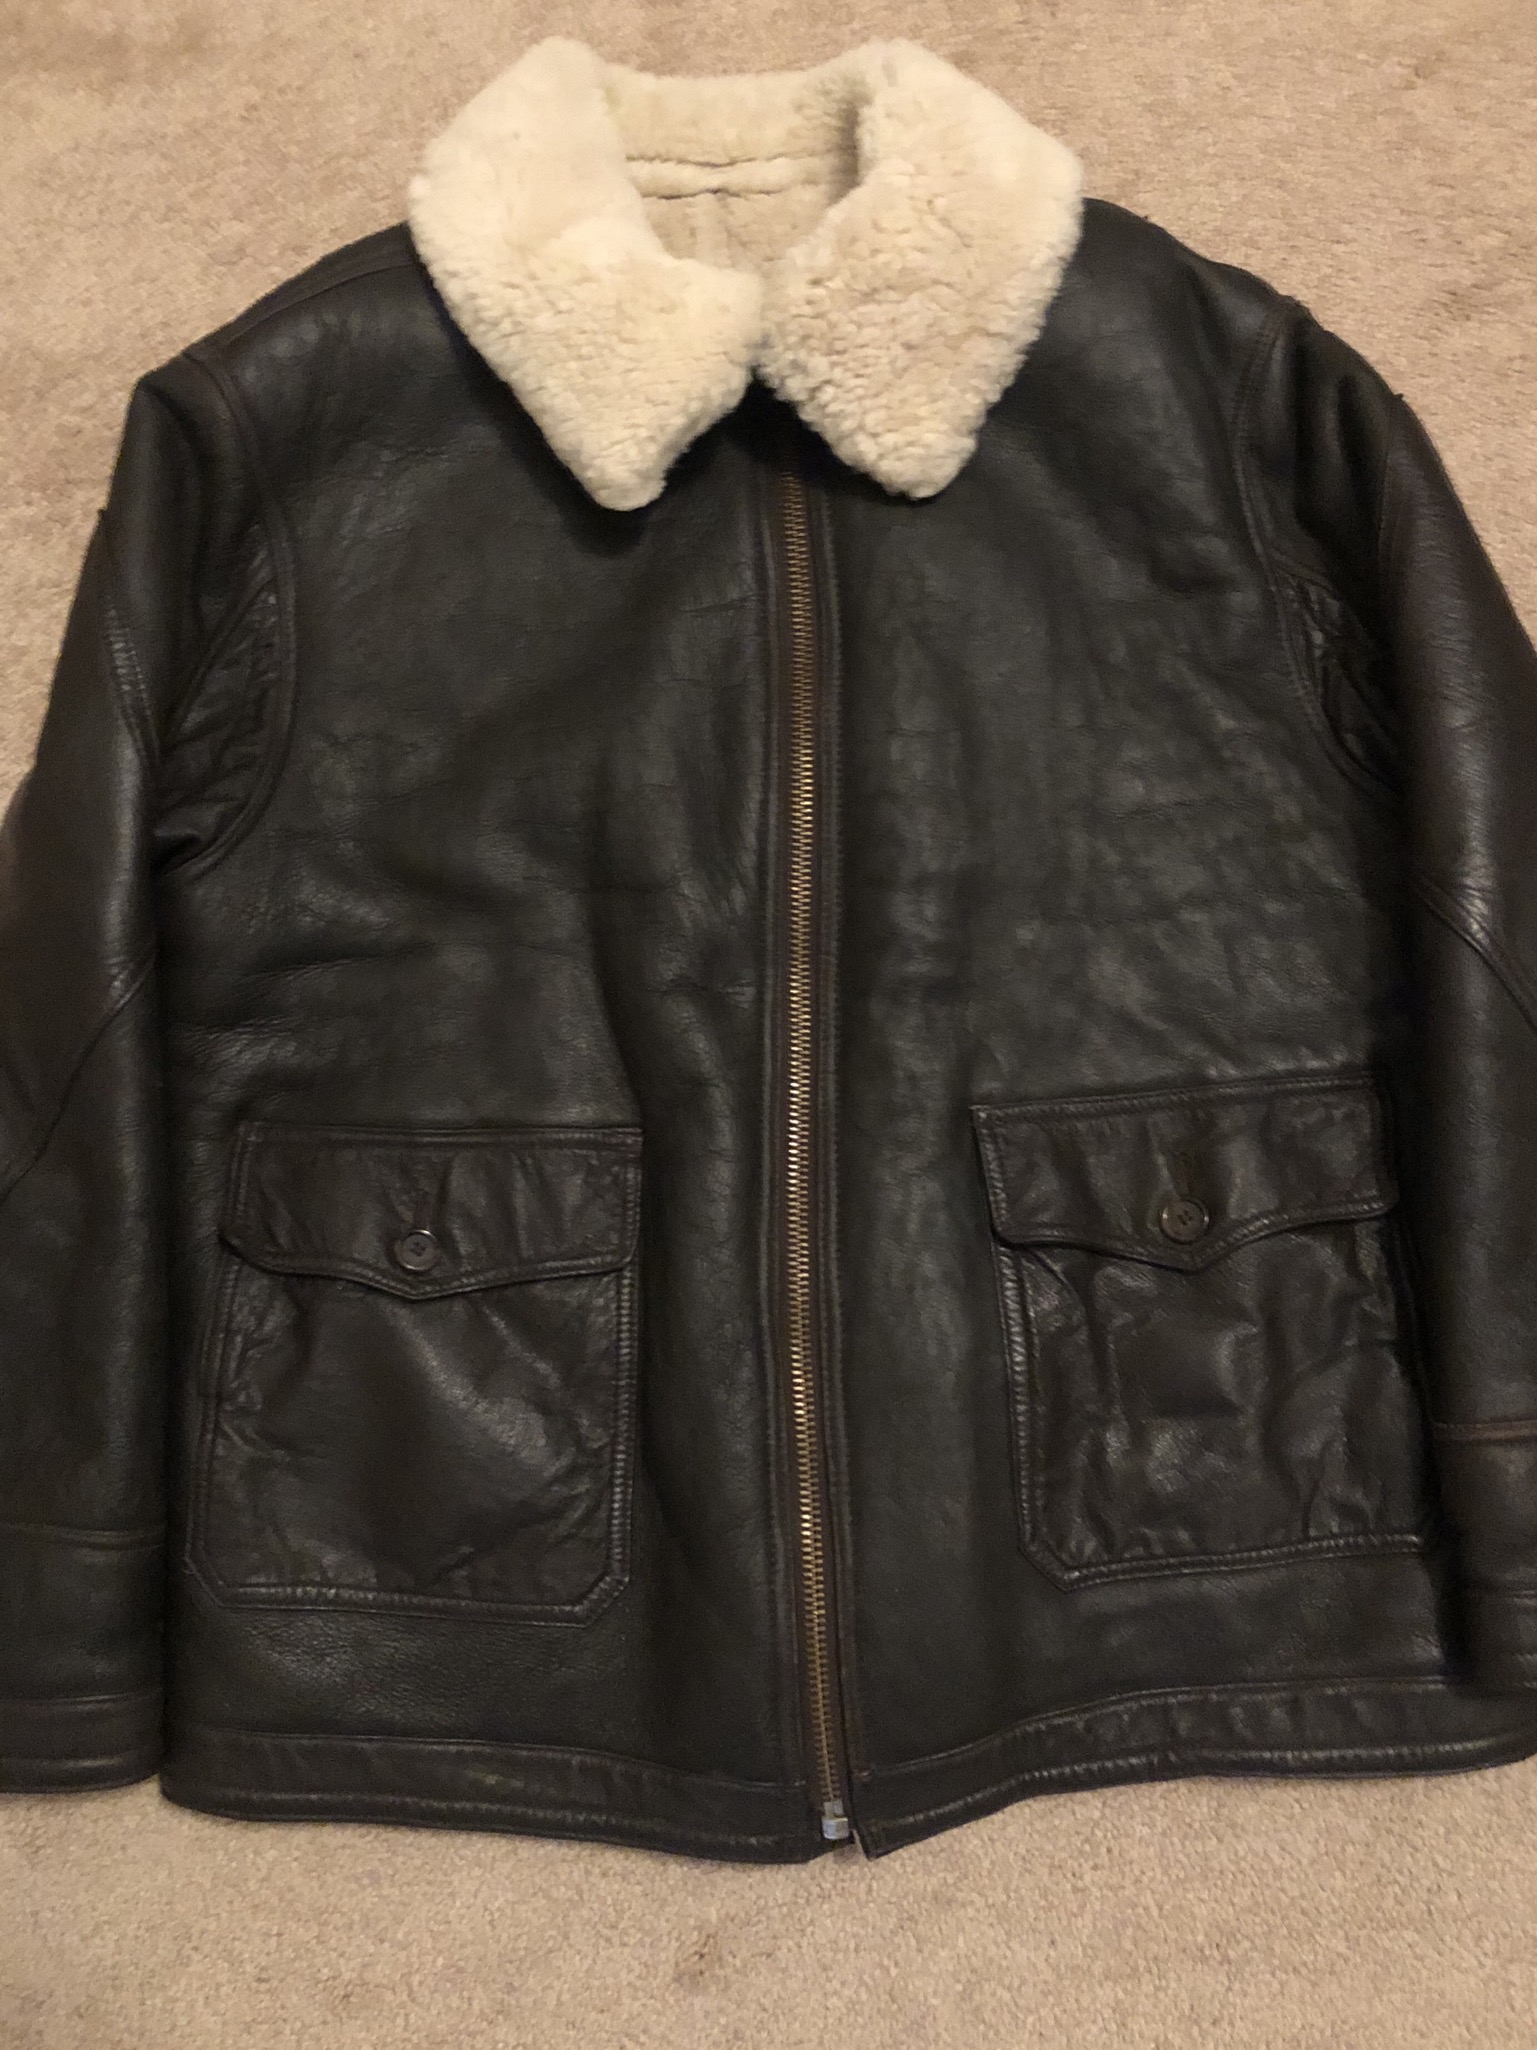 Finally found an Acorn! | Vintage Leather Jackets Forum